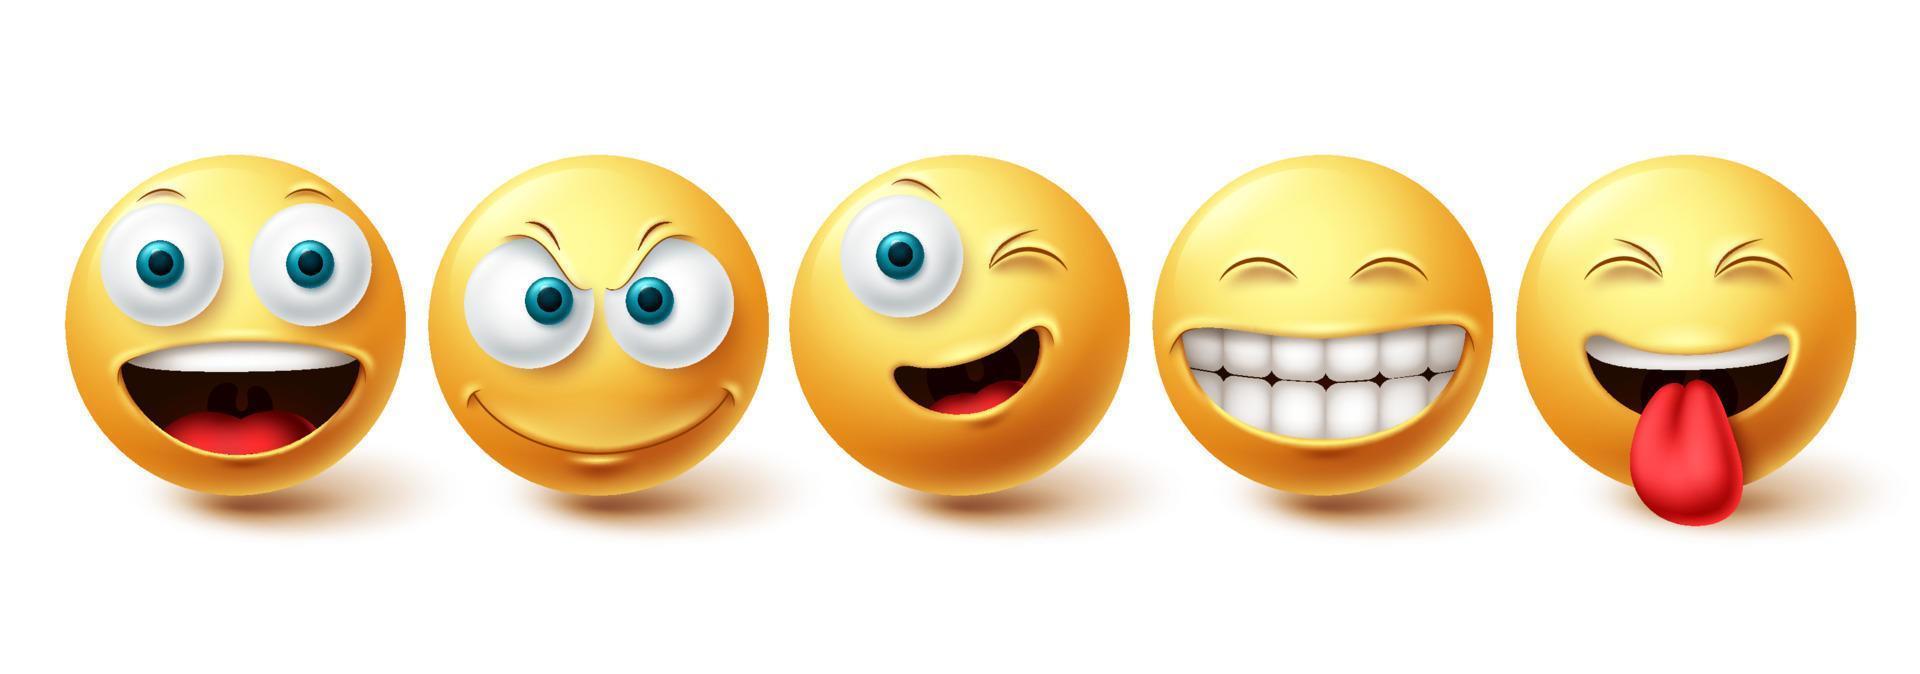 Emoji happy vector set. Emojis face yellow emoticon with funny, winking and naughty facial expressions isolated in white background for design elements. Vector illustration